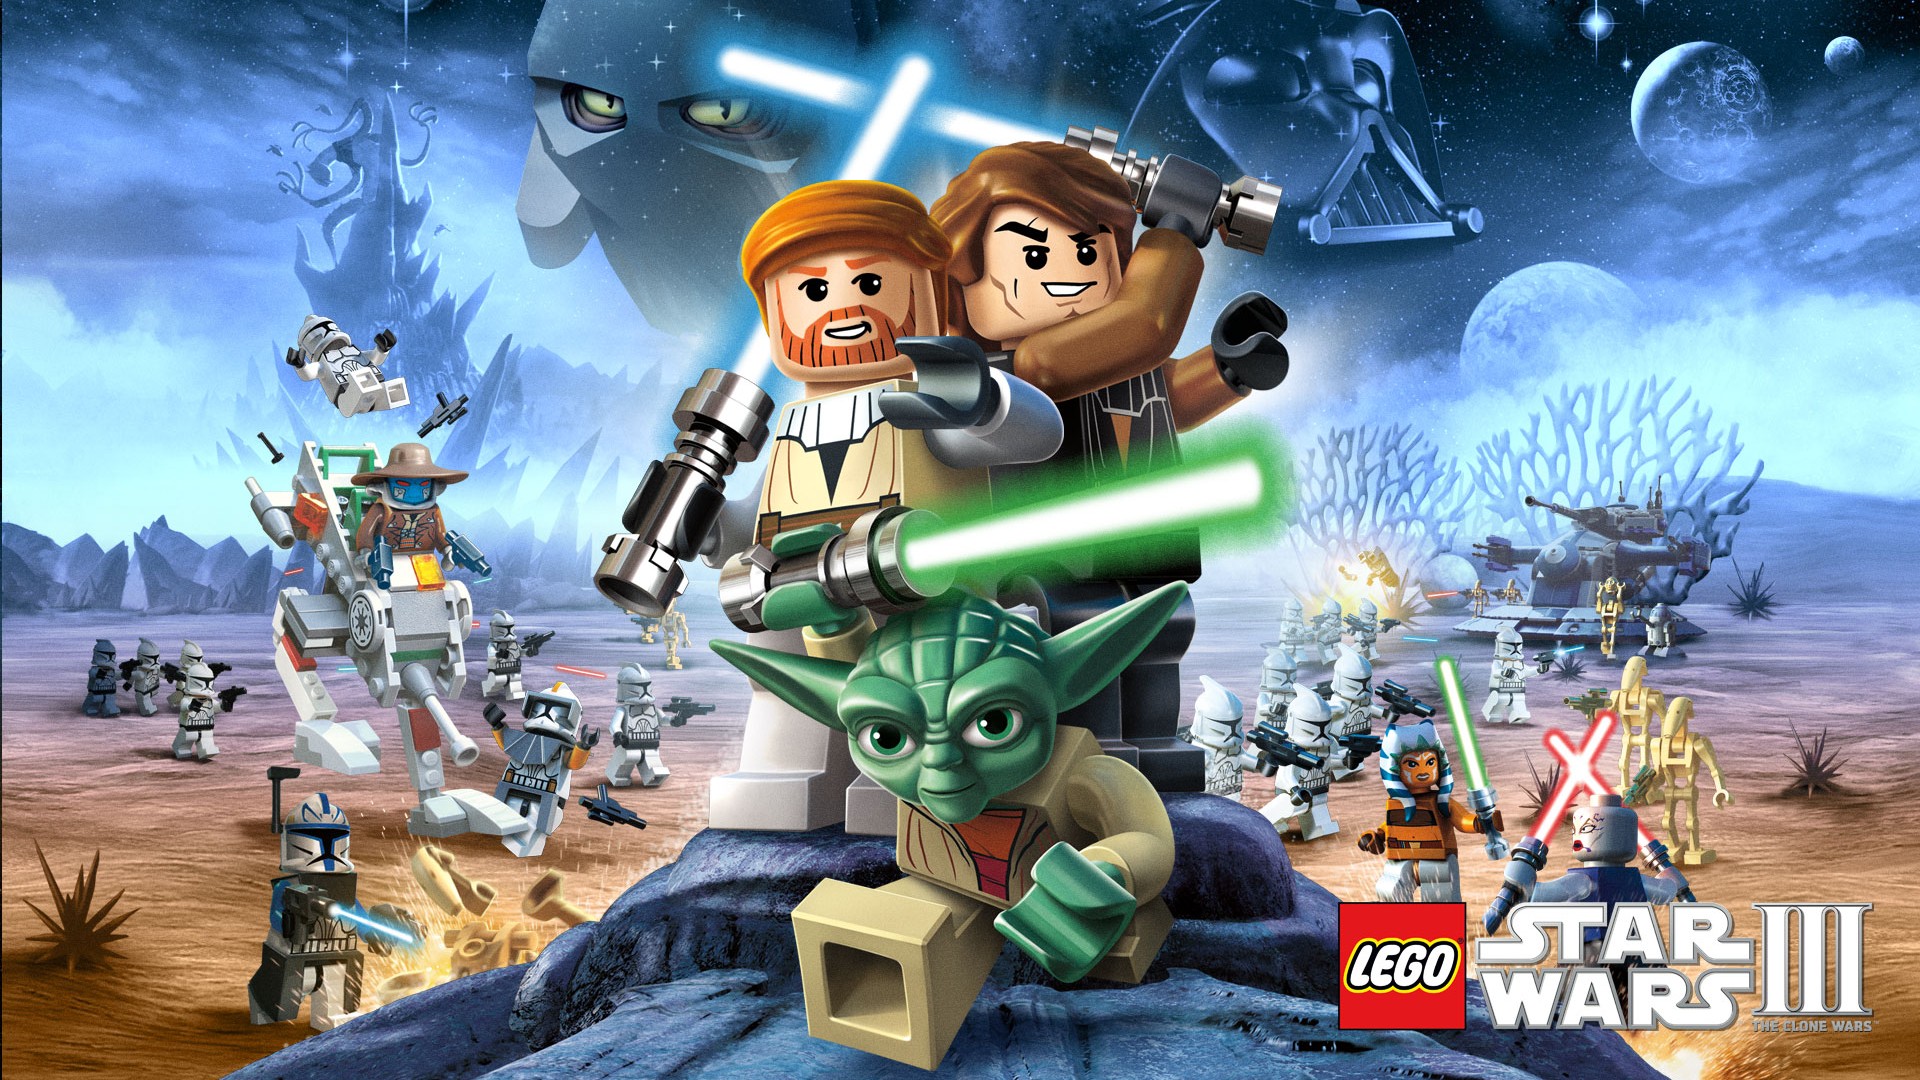 Lego Star Wars Iii: The Clone Wars wallpapers for desktop, download free Star Wars Iii: The Clone pictures and backgrounds for PC | mob.org